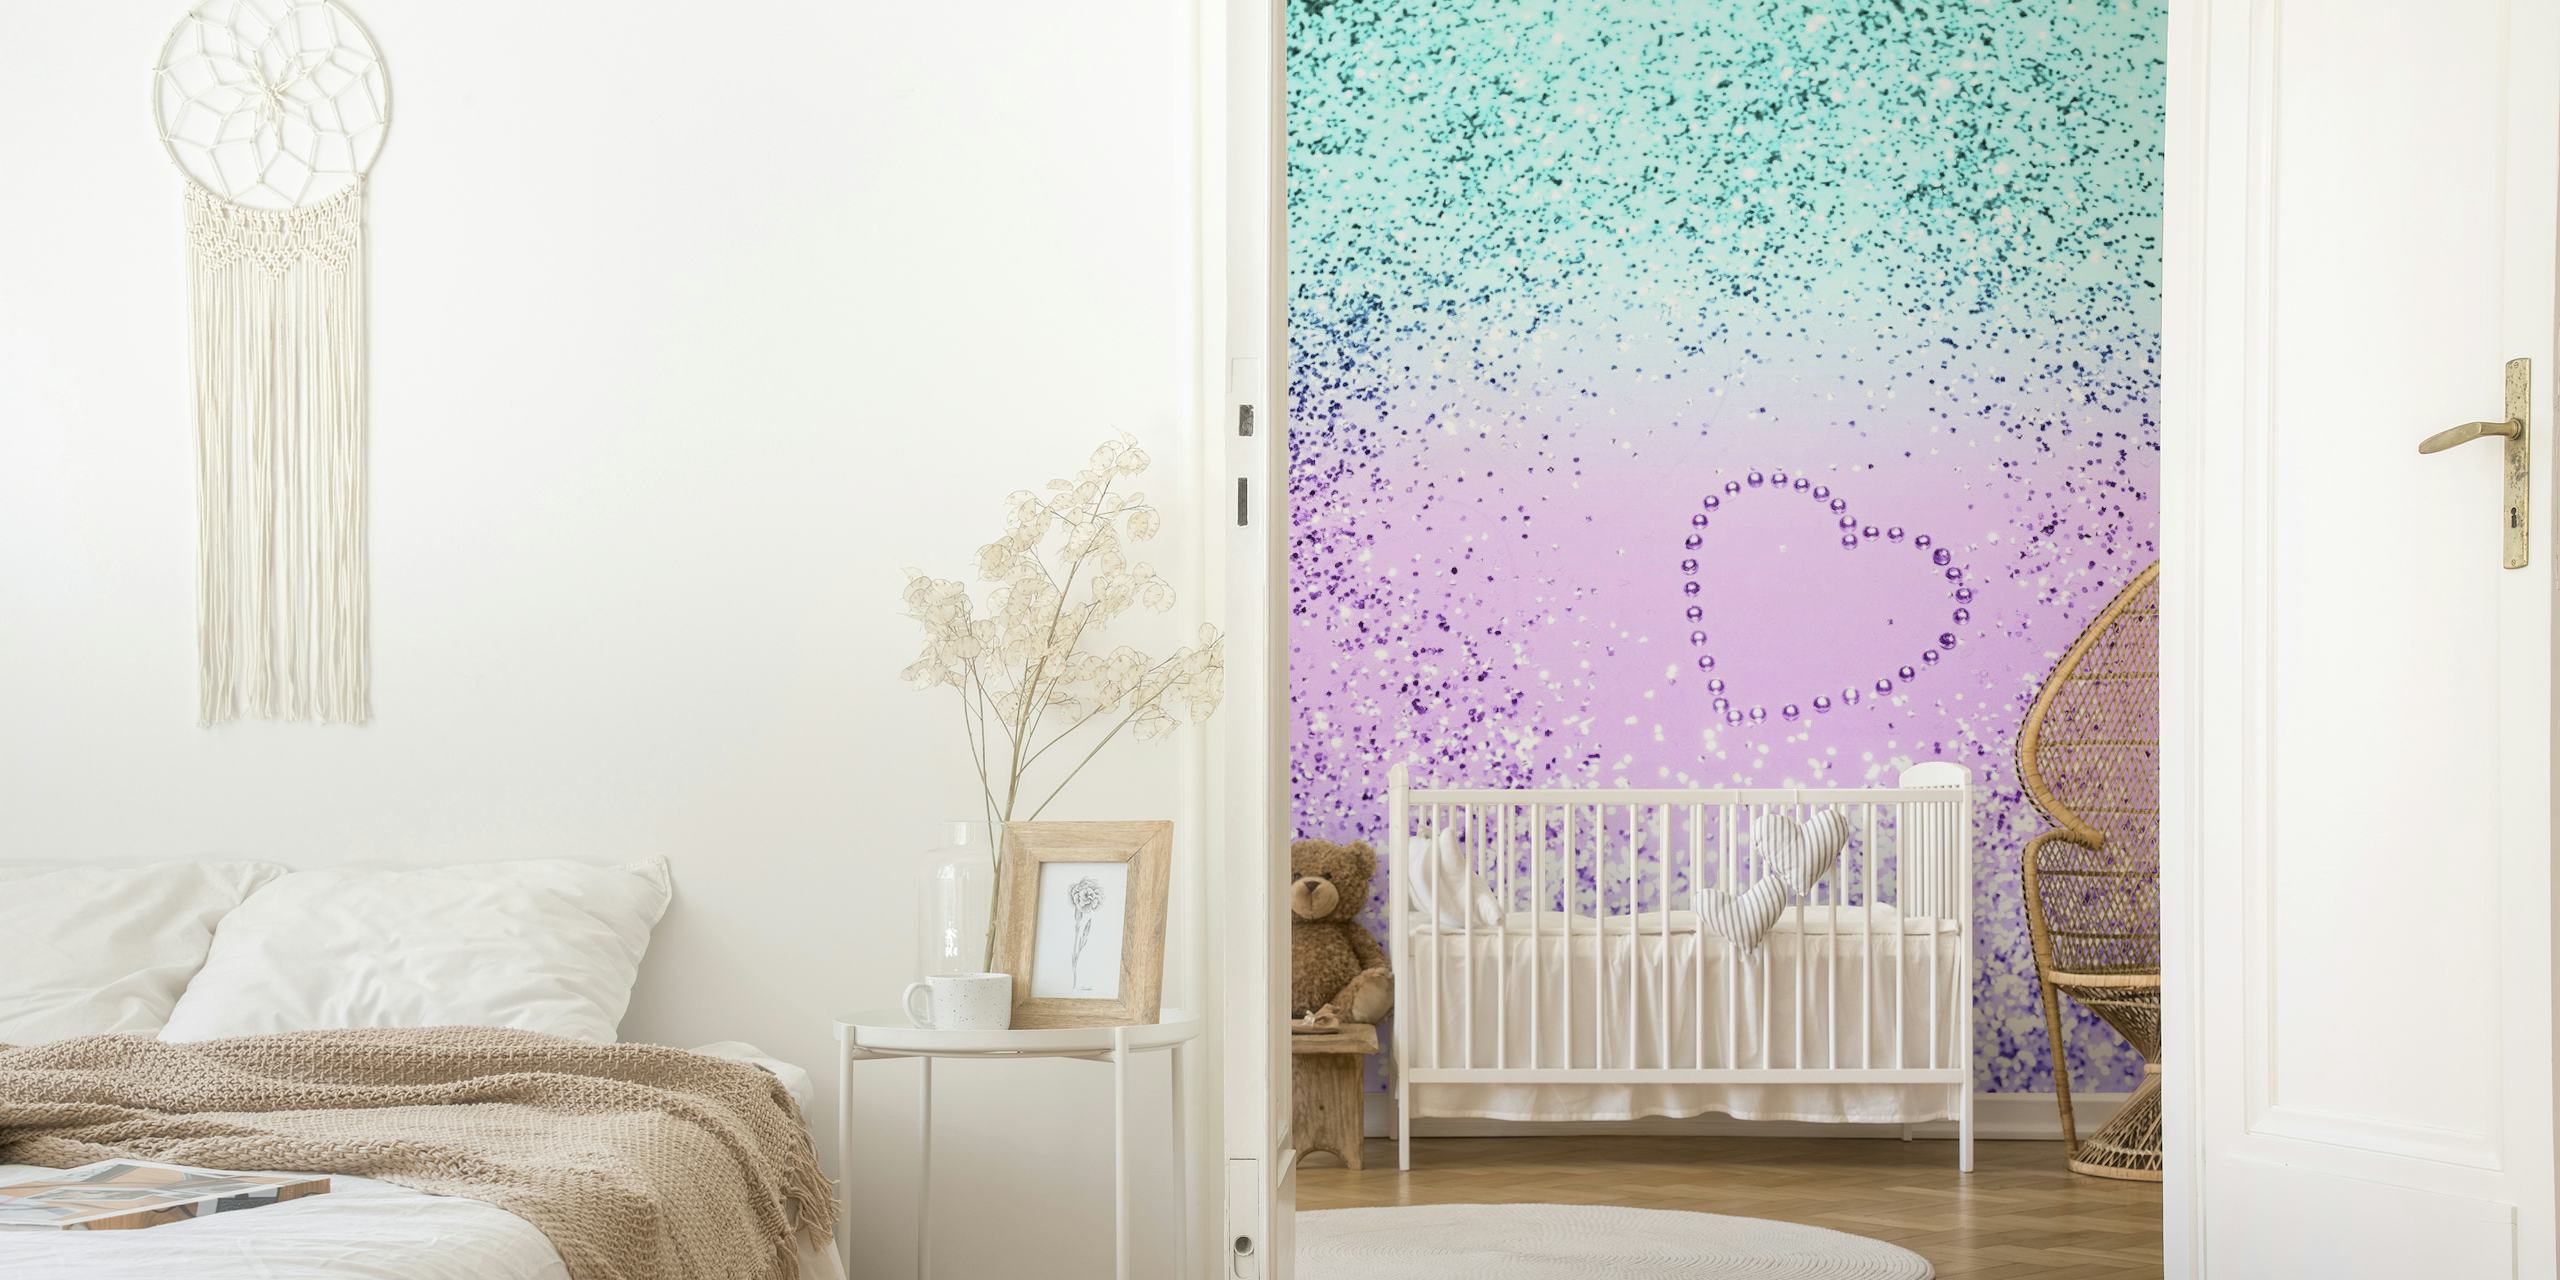 Mystical unicorn-inspired wall mural with a heart made of stars in a gradient of turquoise to purple.